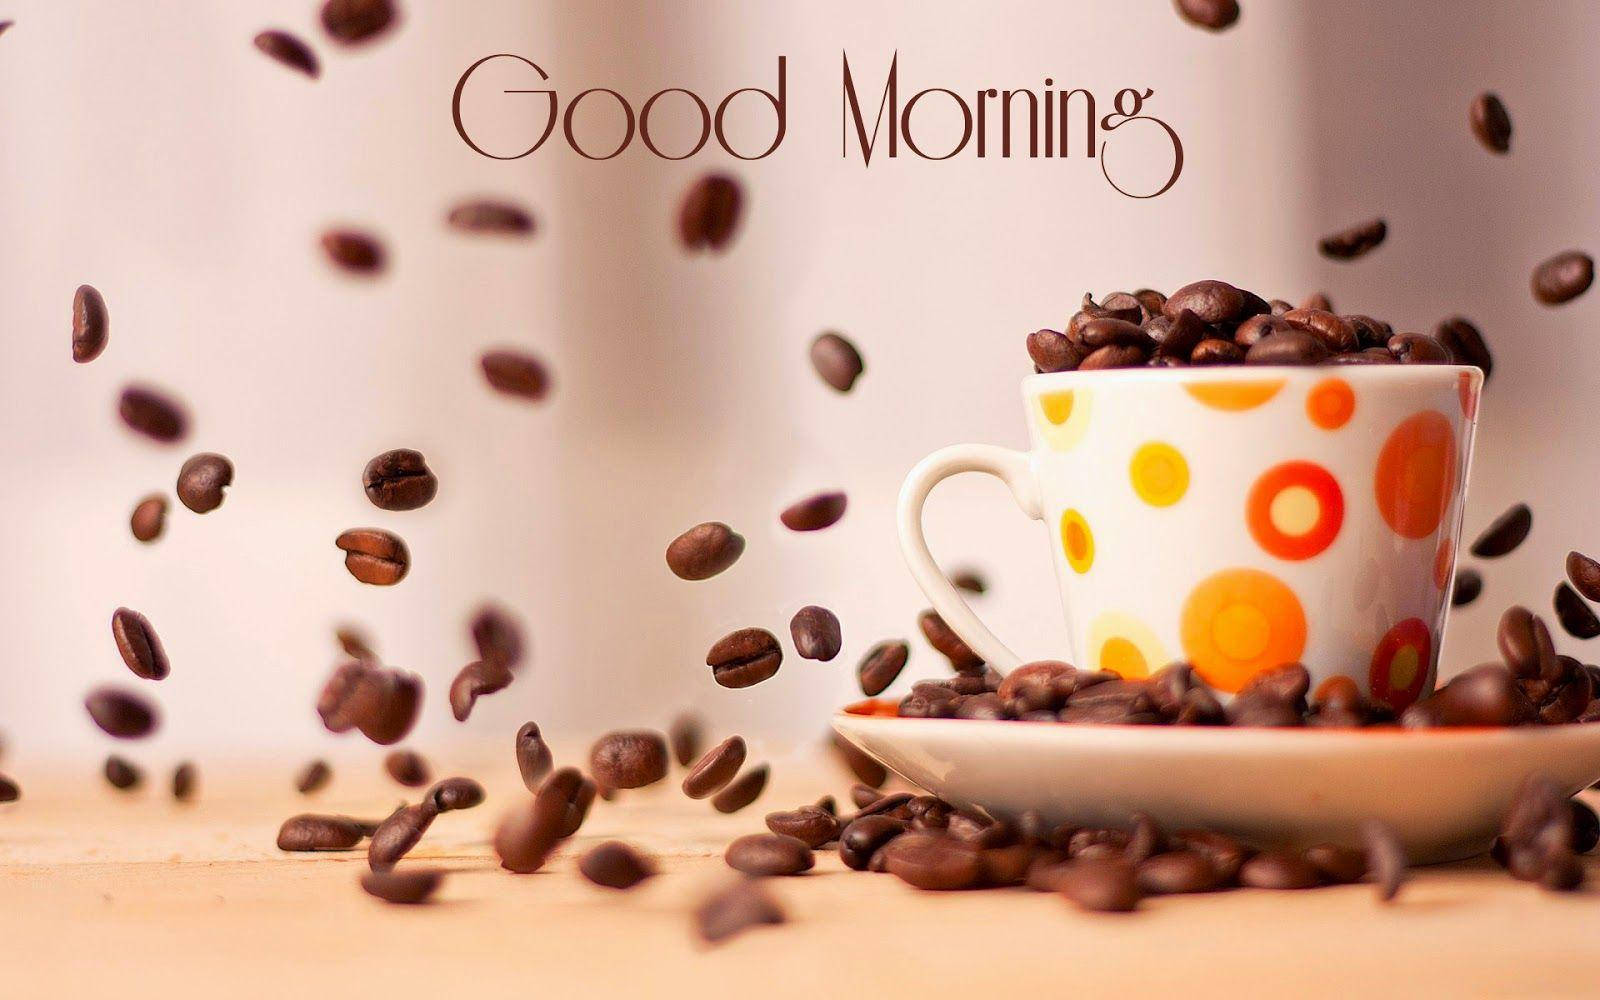 Good Morning Hd With Coffee Beans Background